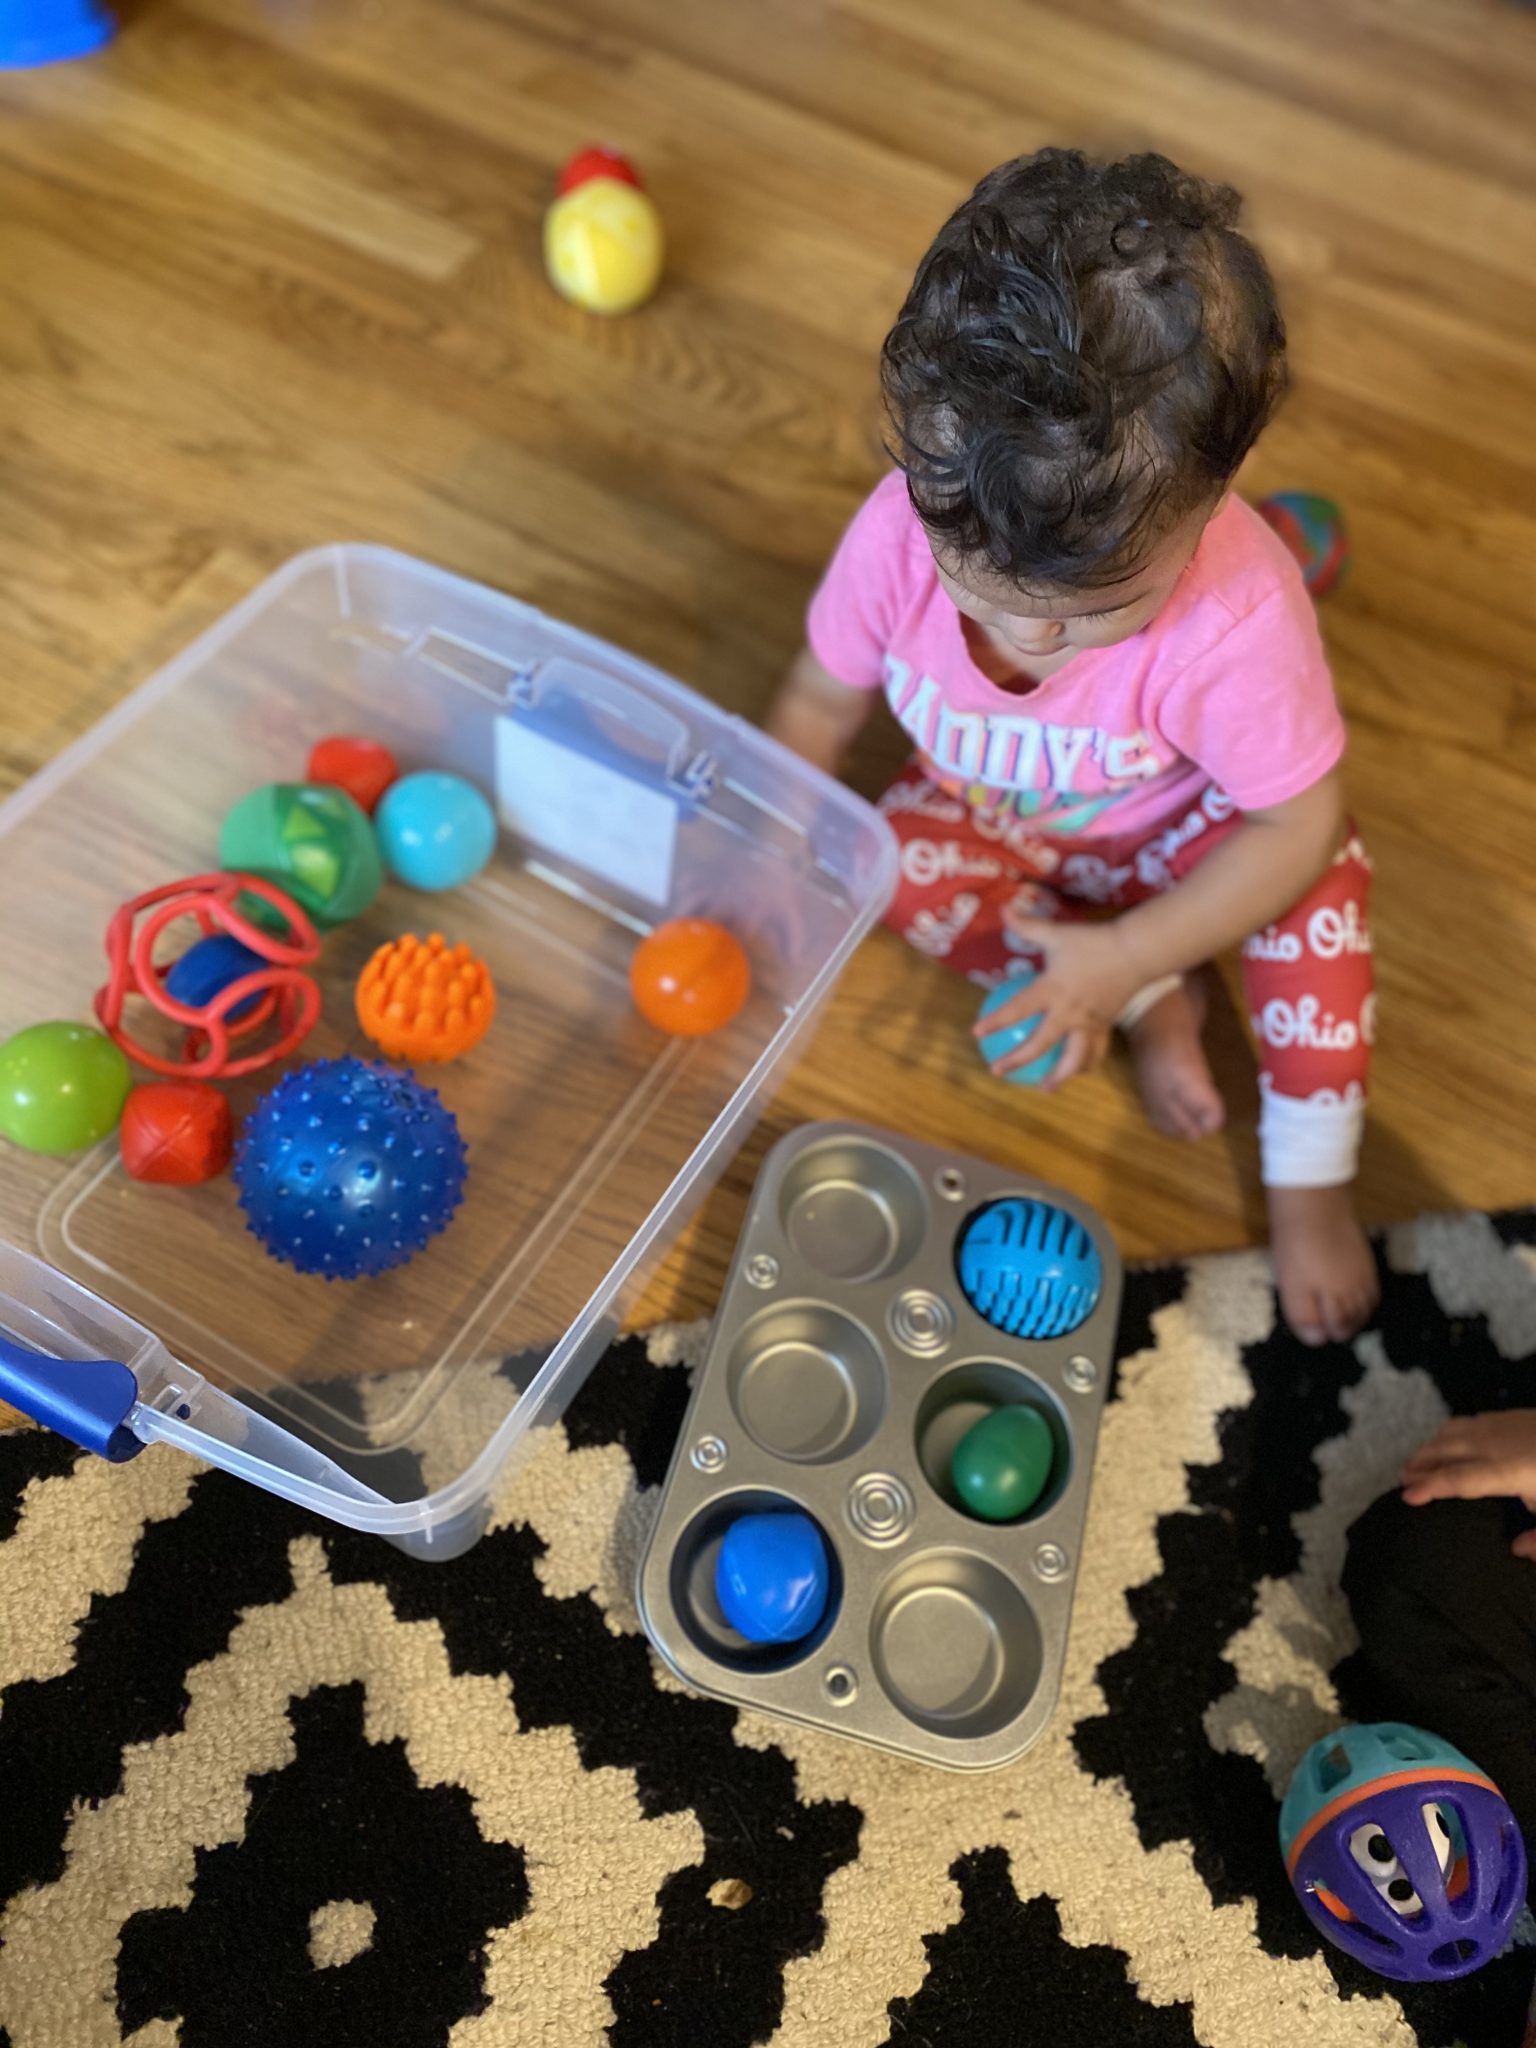 Muffin Pan and Balls Create Easy Toddler Activity